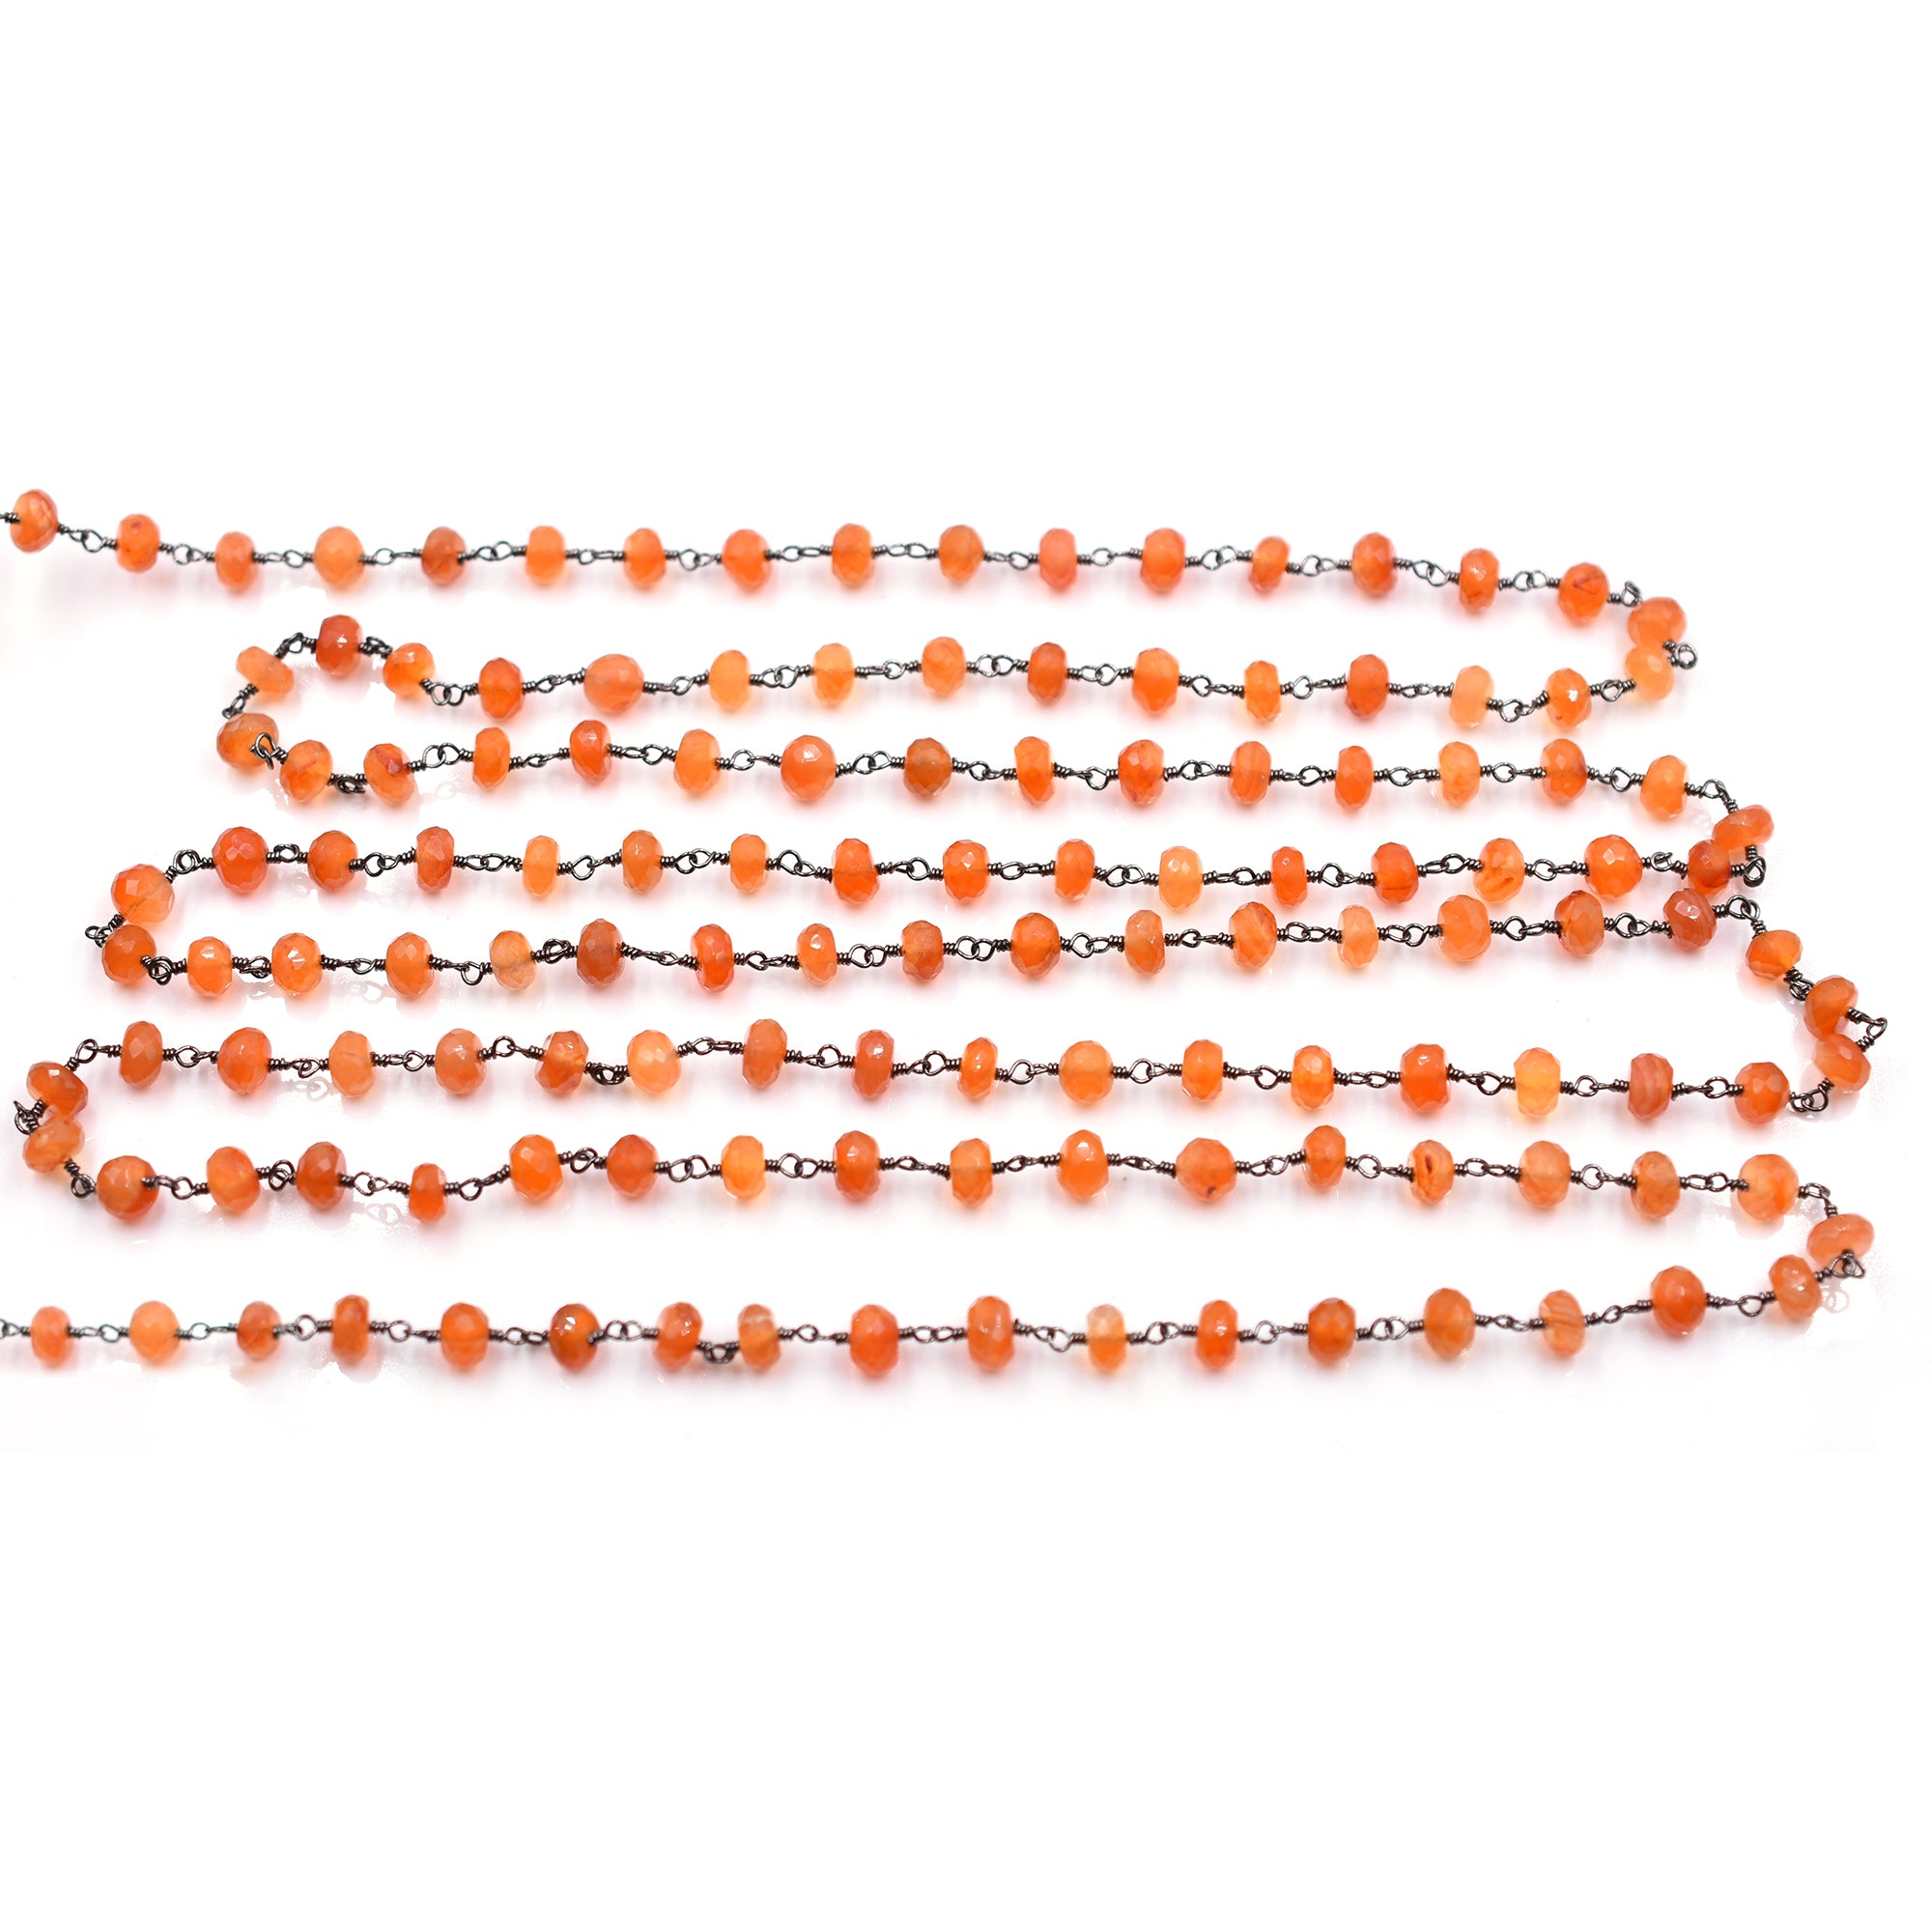 Carnelian 6 To 7 MM Faceted Rondelle Brass Black Oxidized Plated Wire Wrapped Chain Sold by Foot